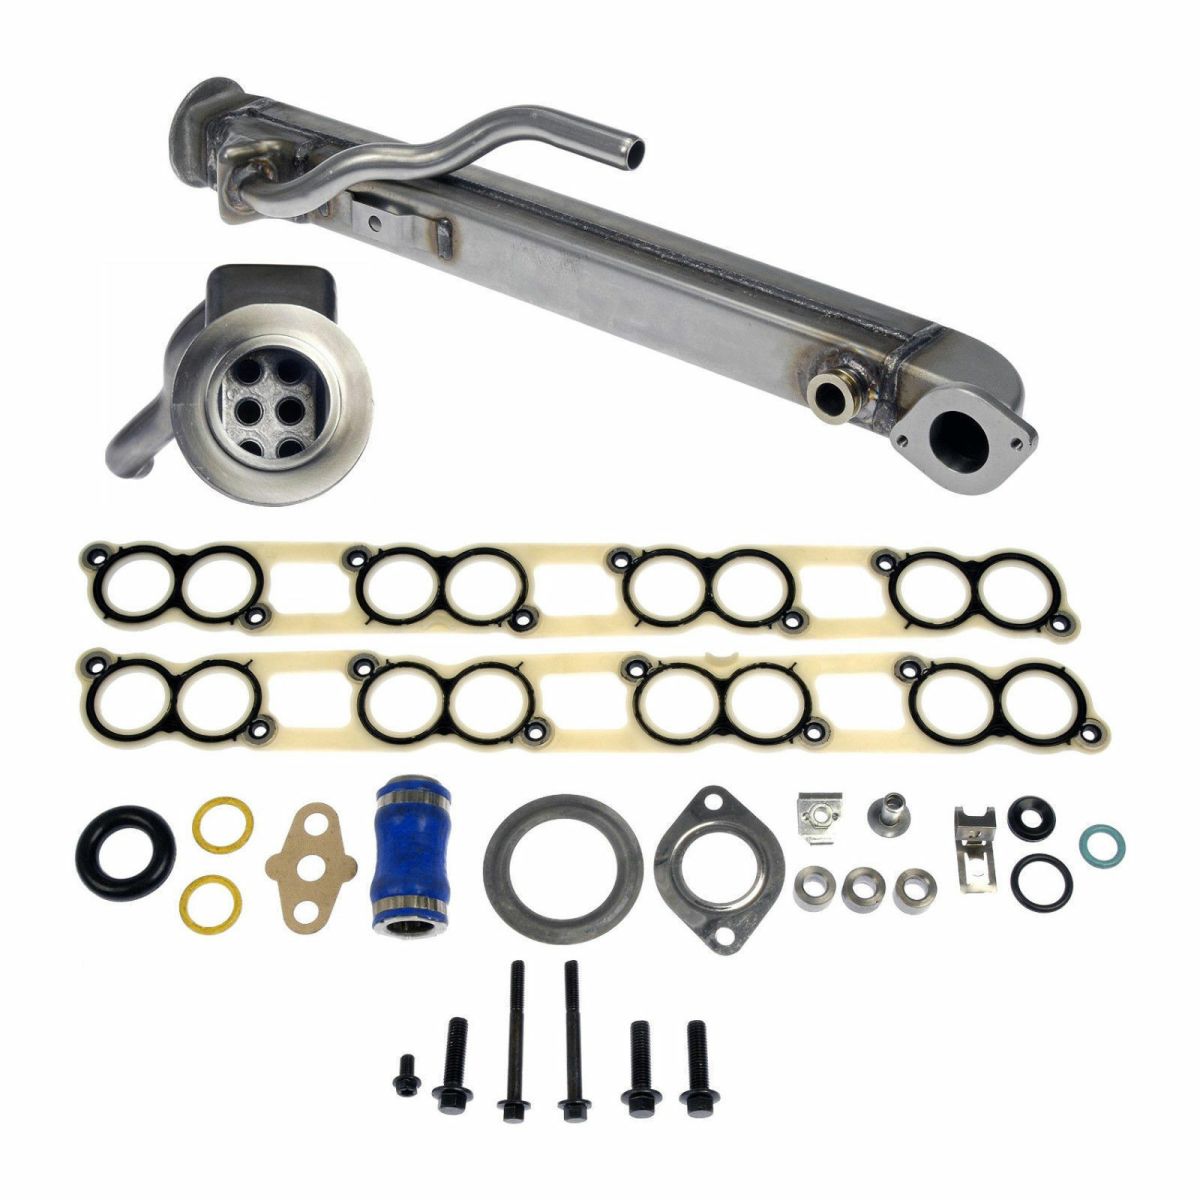 Rudy's Performance Parts - Rudy's Upgraded Square EGR Cooler & Gasket Kit For 04.5-07 6.0 Powerstroke